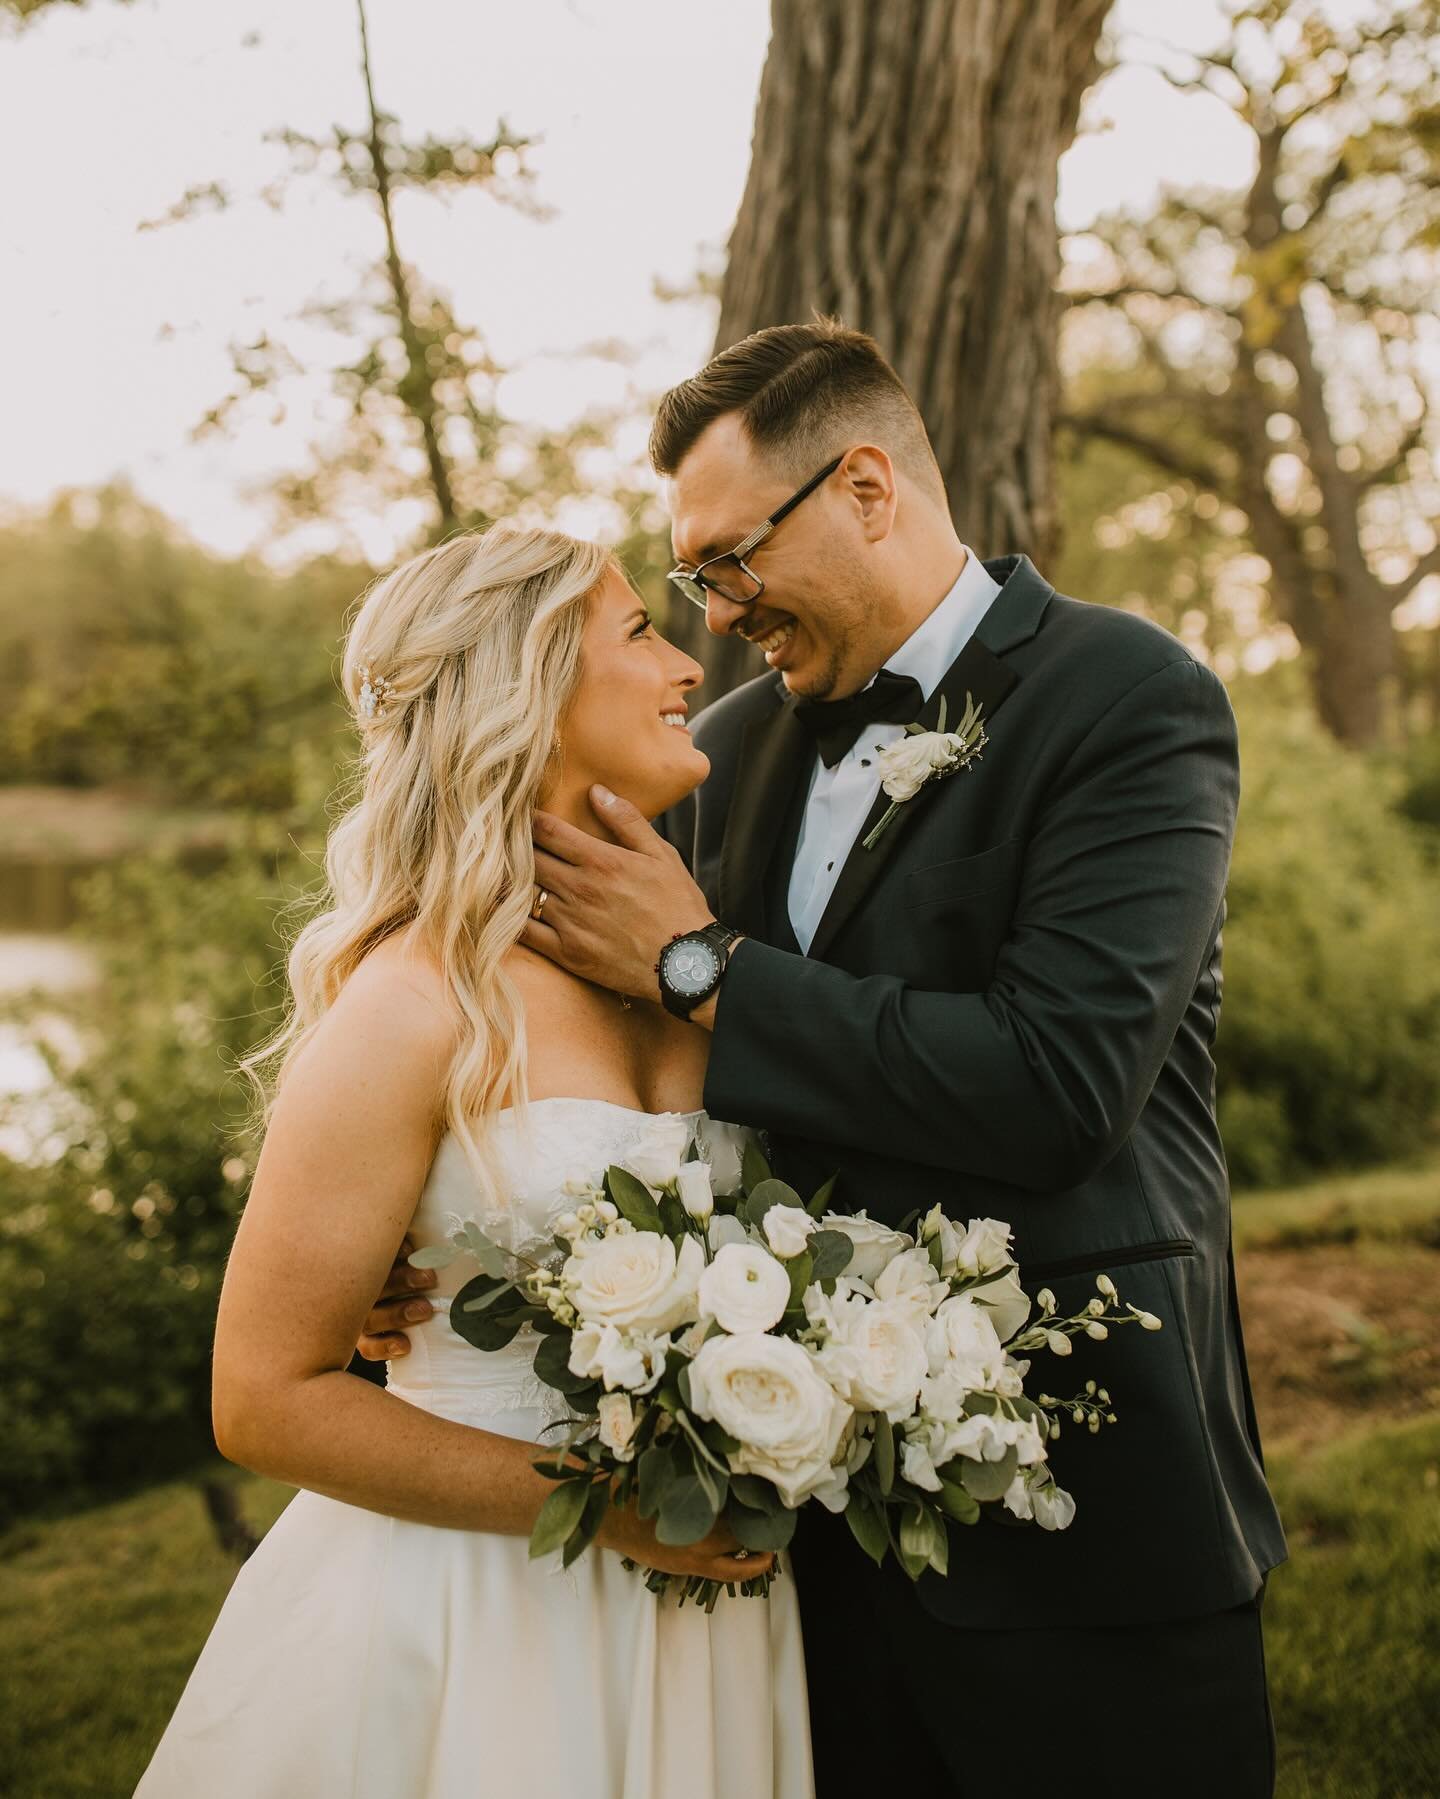 Becky &amp; Chris&rsquo;s wedding on Saturday was so gorgeous and sweet!! 🥰 We loved documenting their day at @1841farmsandvineyard ❤️